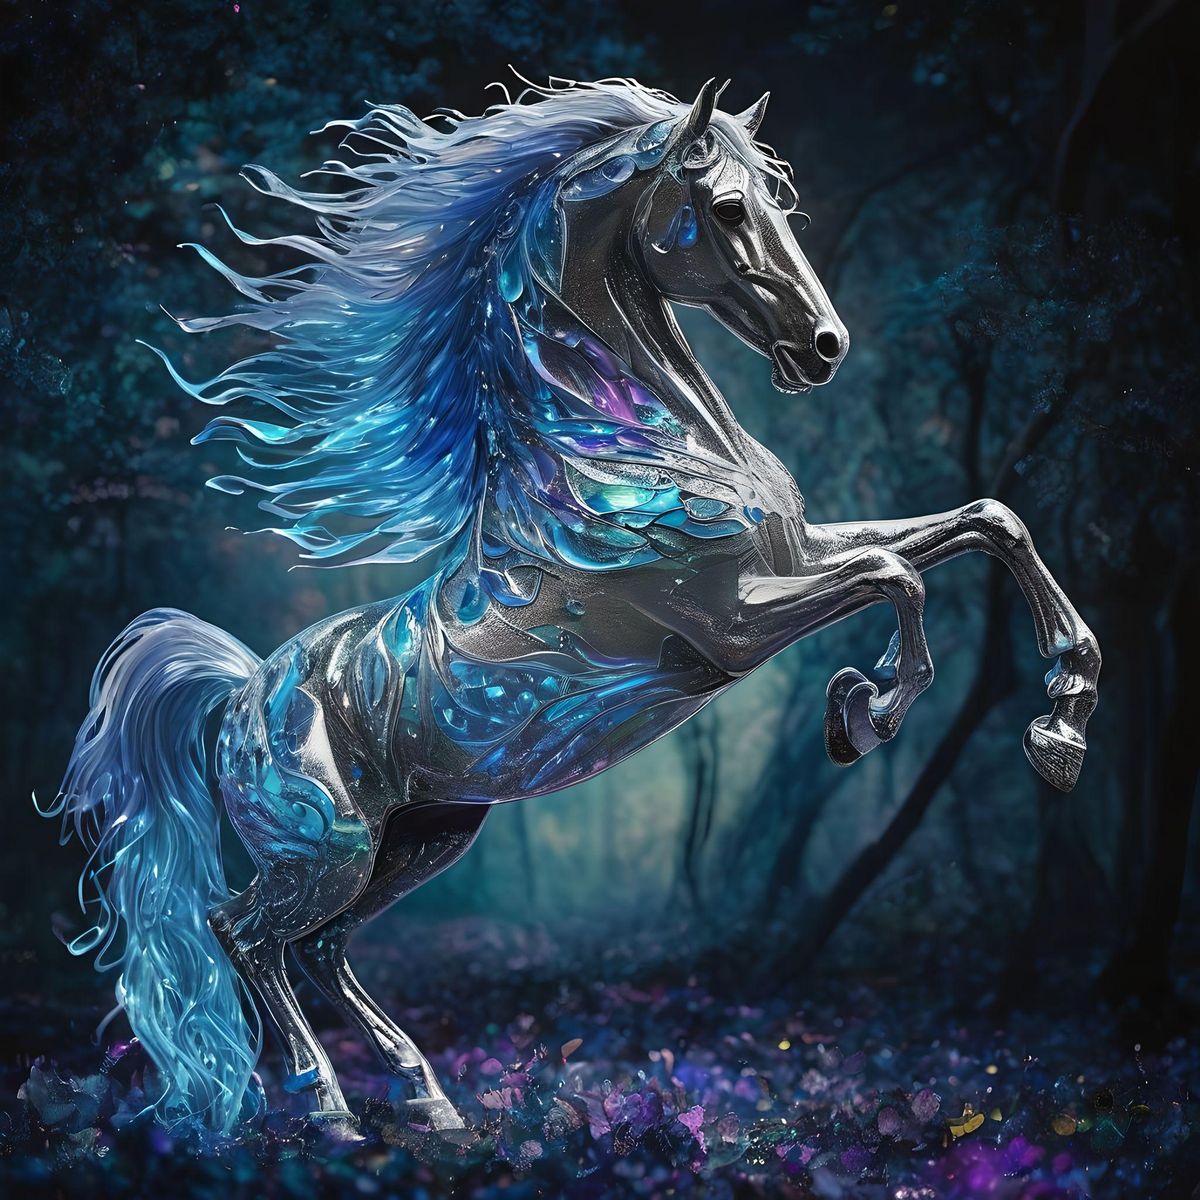  Create a beautiful creature from the worl of dreams, shimmering with the iridescence of a thousand rainbows. This majestic being, known as the Crystal Horse, gallops through the realms of fantasy with grace and power. Its hooves leave trails of sparkling stardust in its wake, and its mane flows like rivers of molten crystal. With eyes that hold the neon blue wisdom of ages, the Crystal Horse embodies the magic and beauty of a world beyond our own. He is in a wood of magical ferns and trees that instead of leaves have birds and butterflies crowns the crystal horse, follow the light, surrealictic and wonderful image. of a trsnaluscent horse




